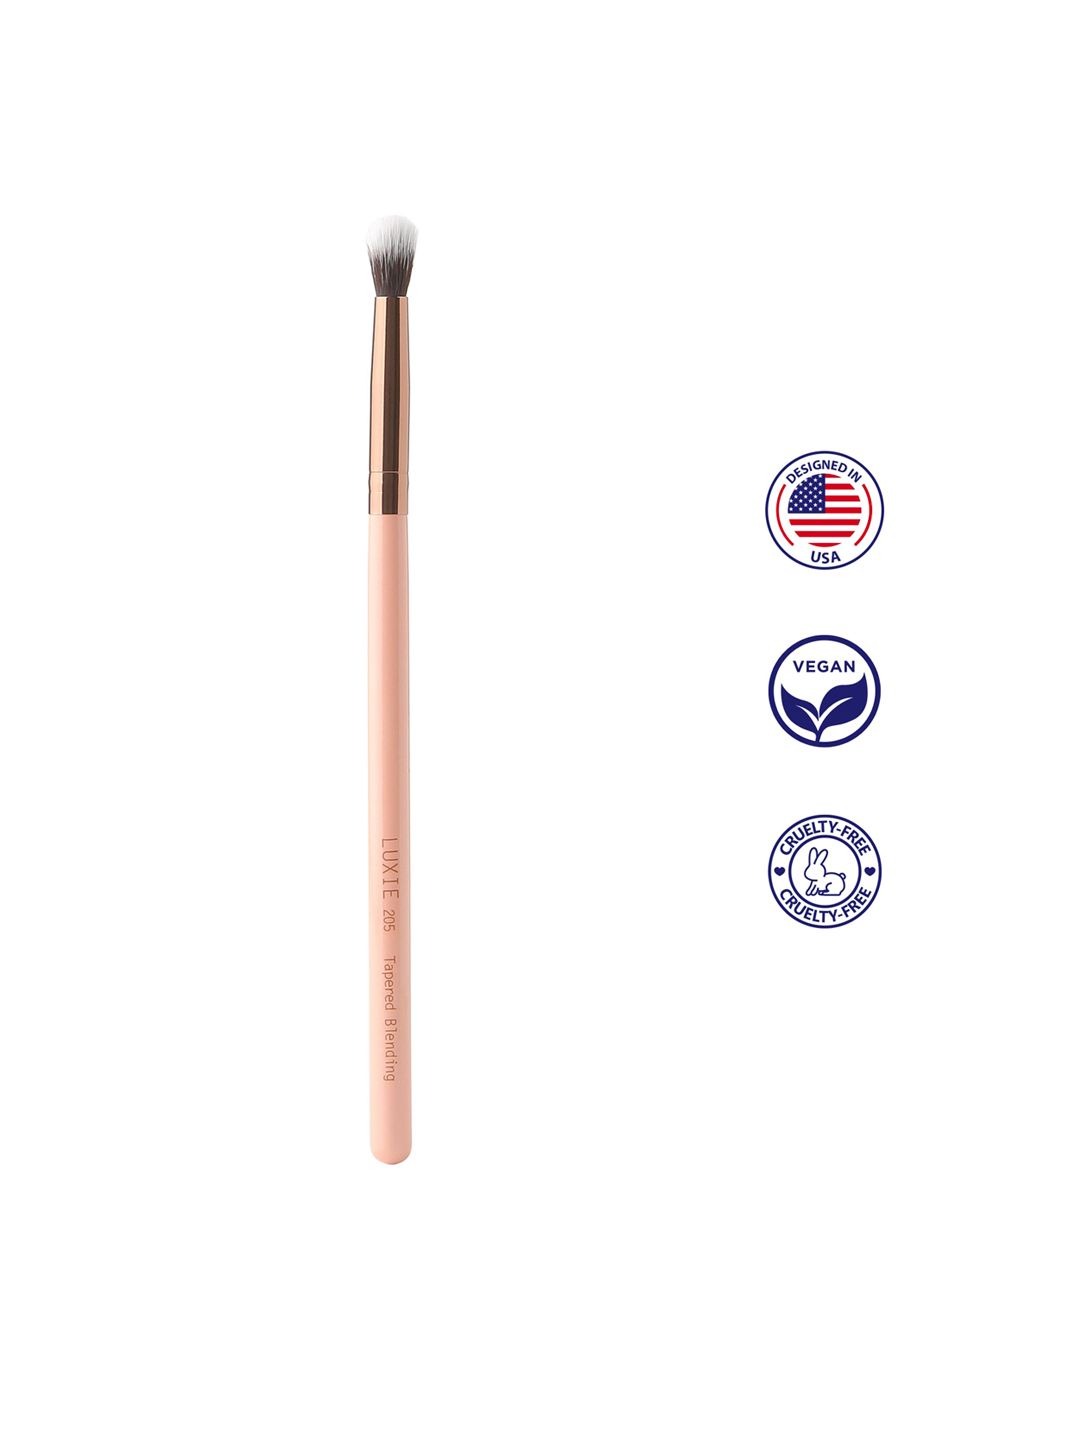 LUXIE Rose Gold Tapered Blending Brush - 205 Price in India